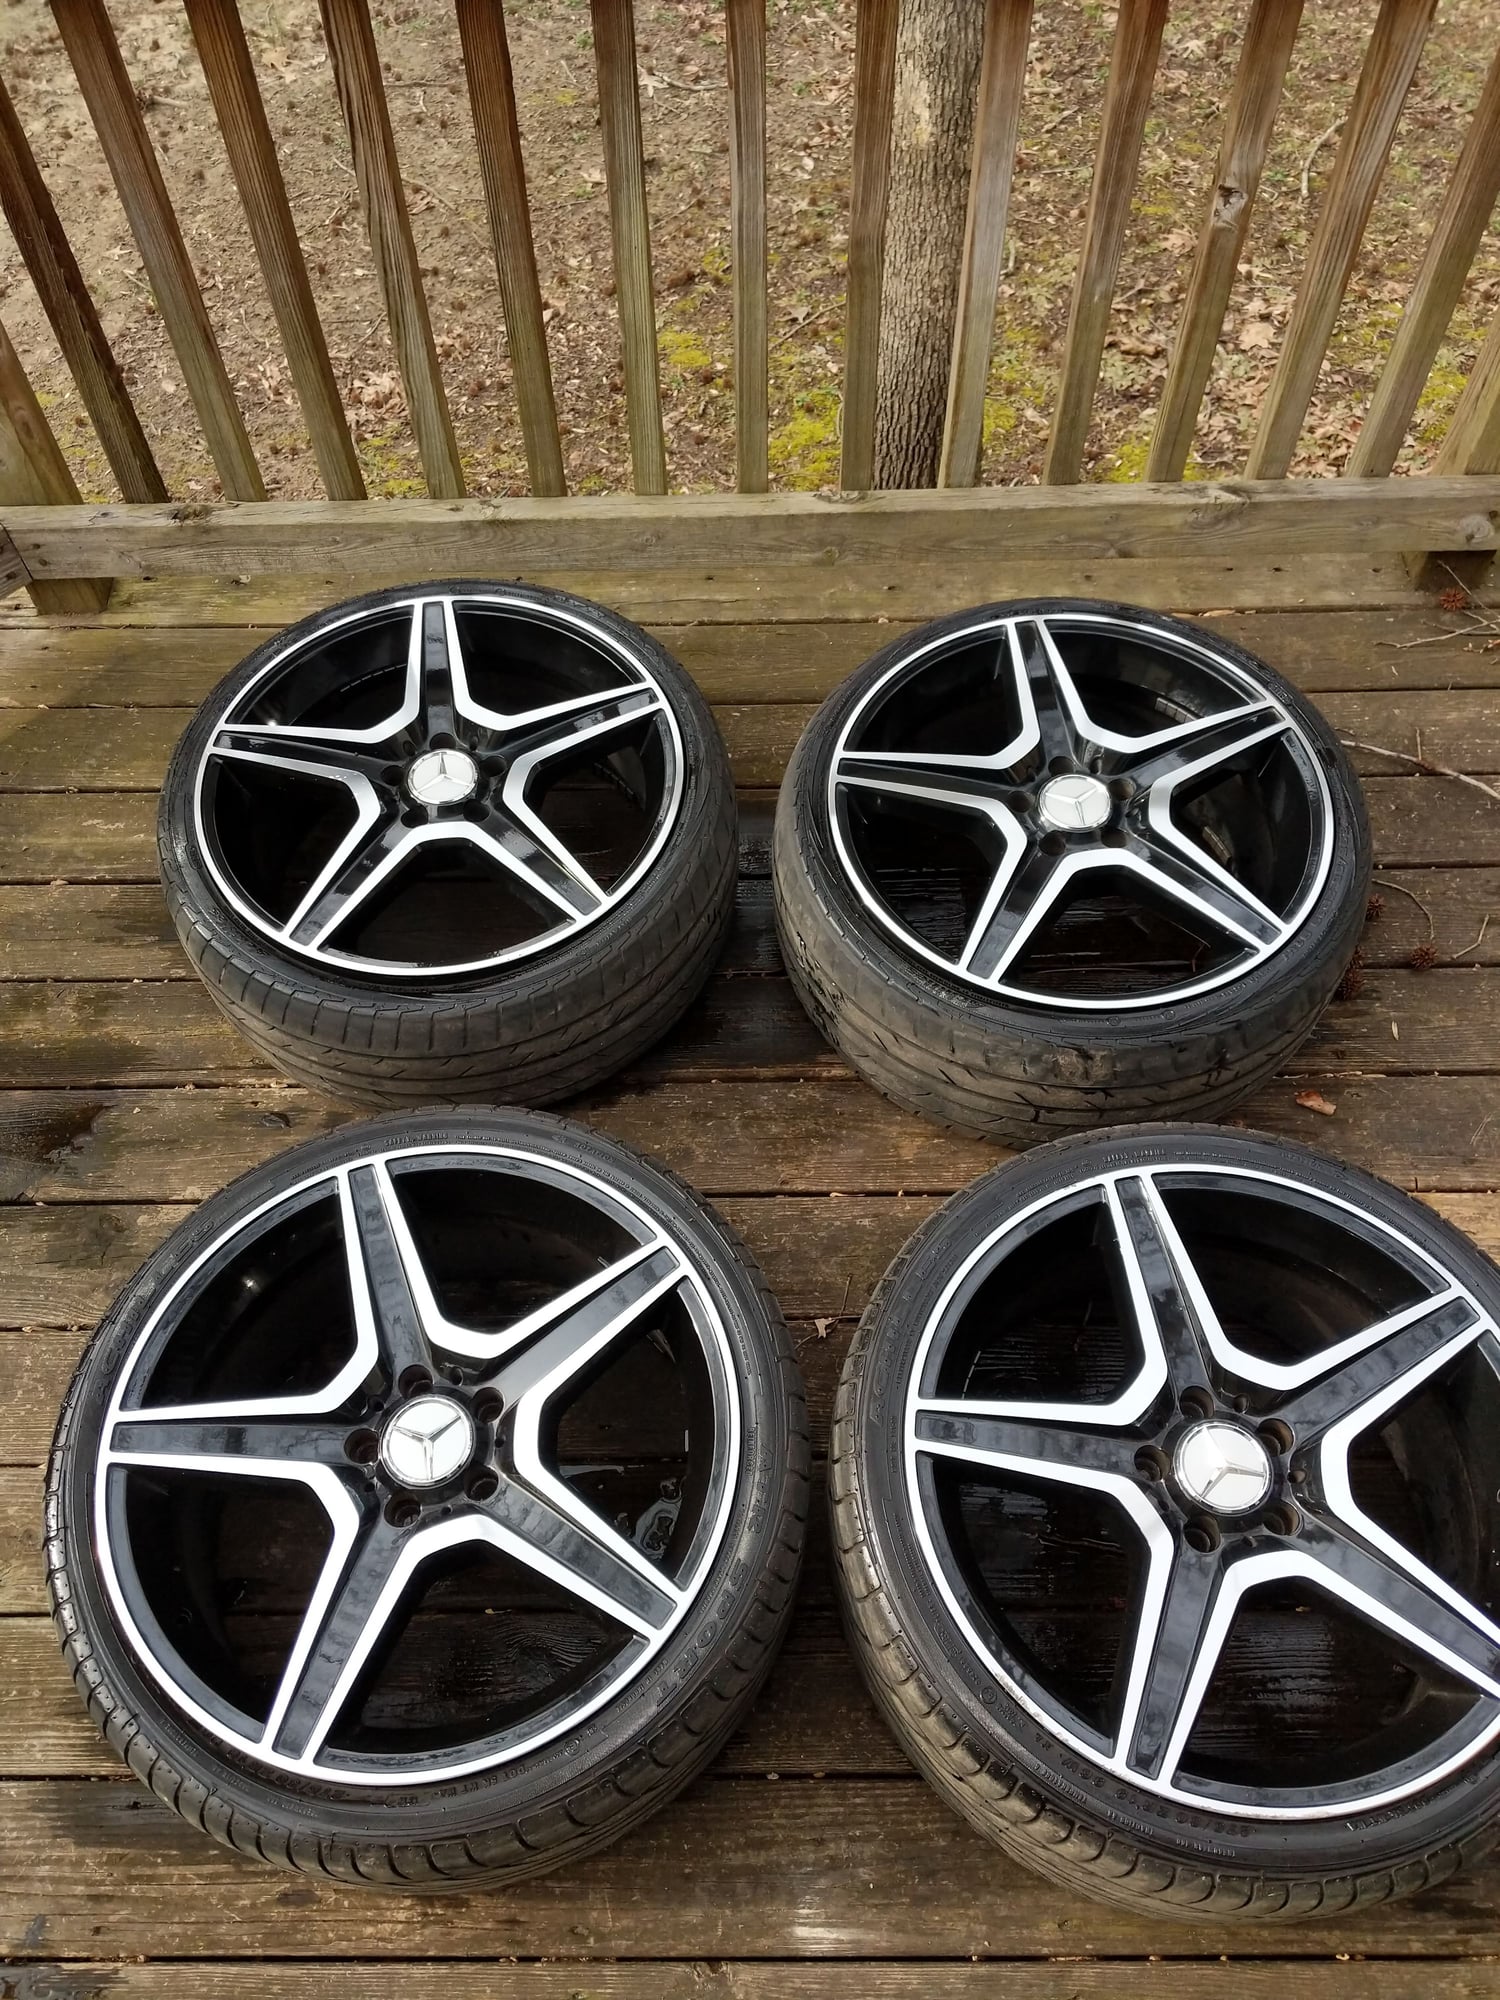 Wheels and Tires/Axles - 19" C63 AMG style Rims set (Staggered - with tires) - Used - 2010 to 2014 Mercedes-Benz E550 - Richmond, VA 23236, United States